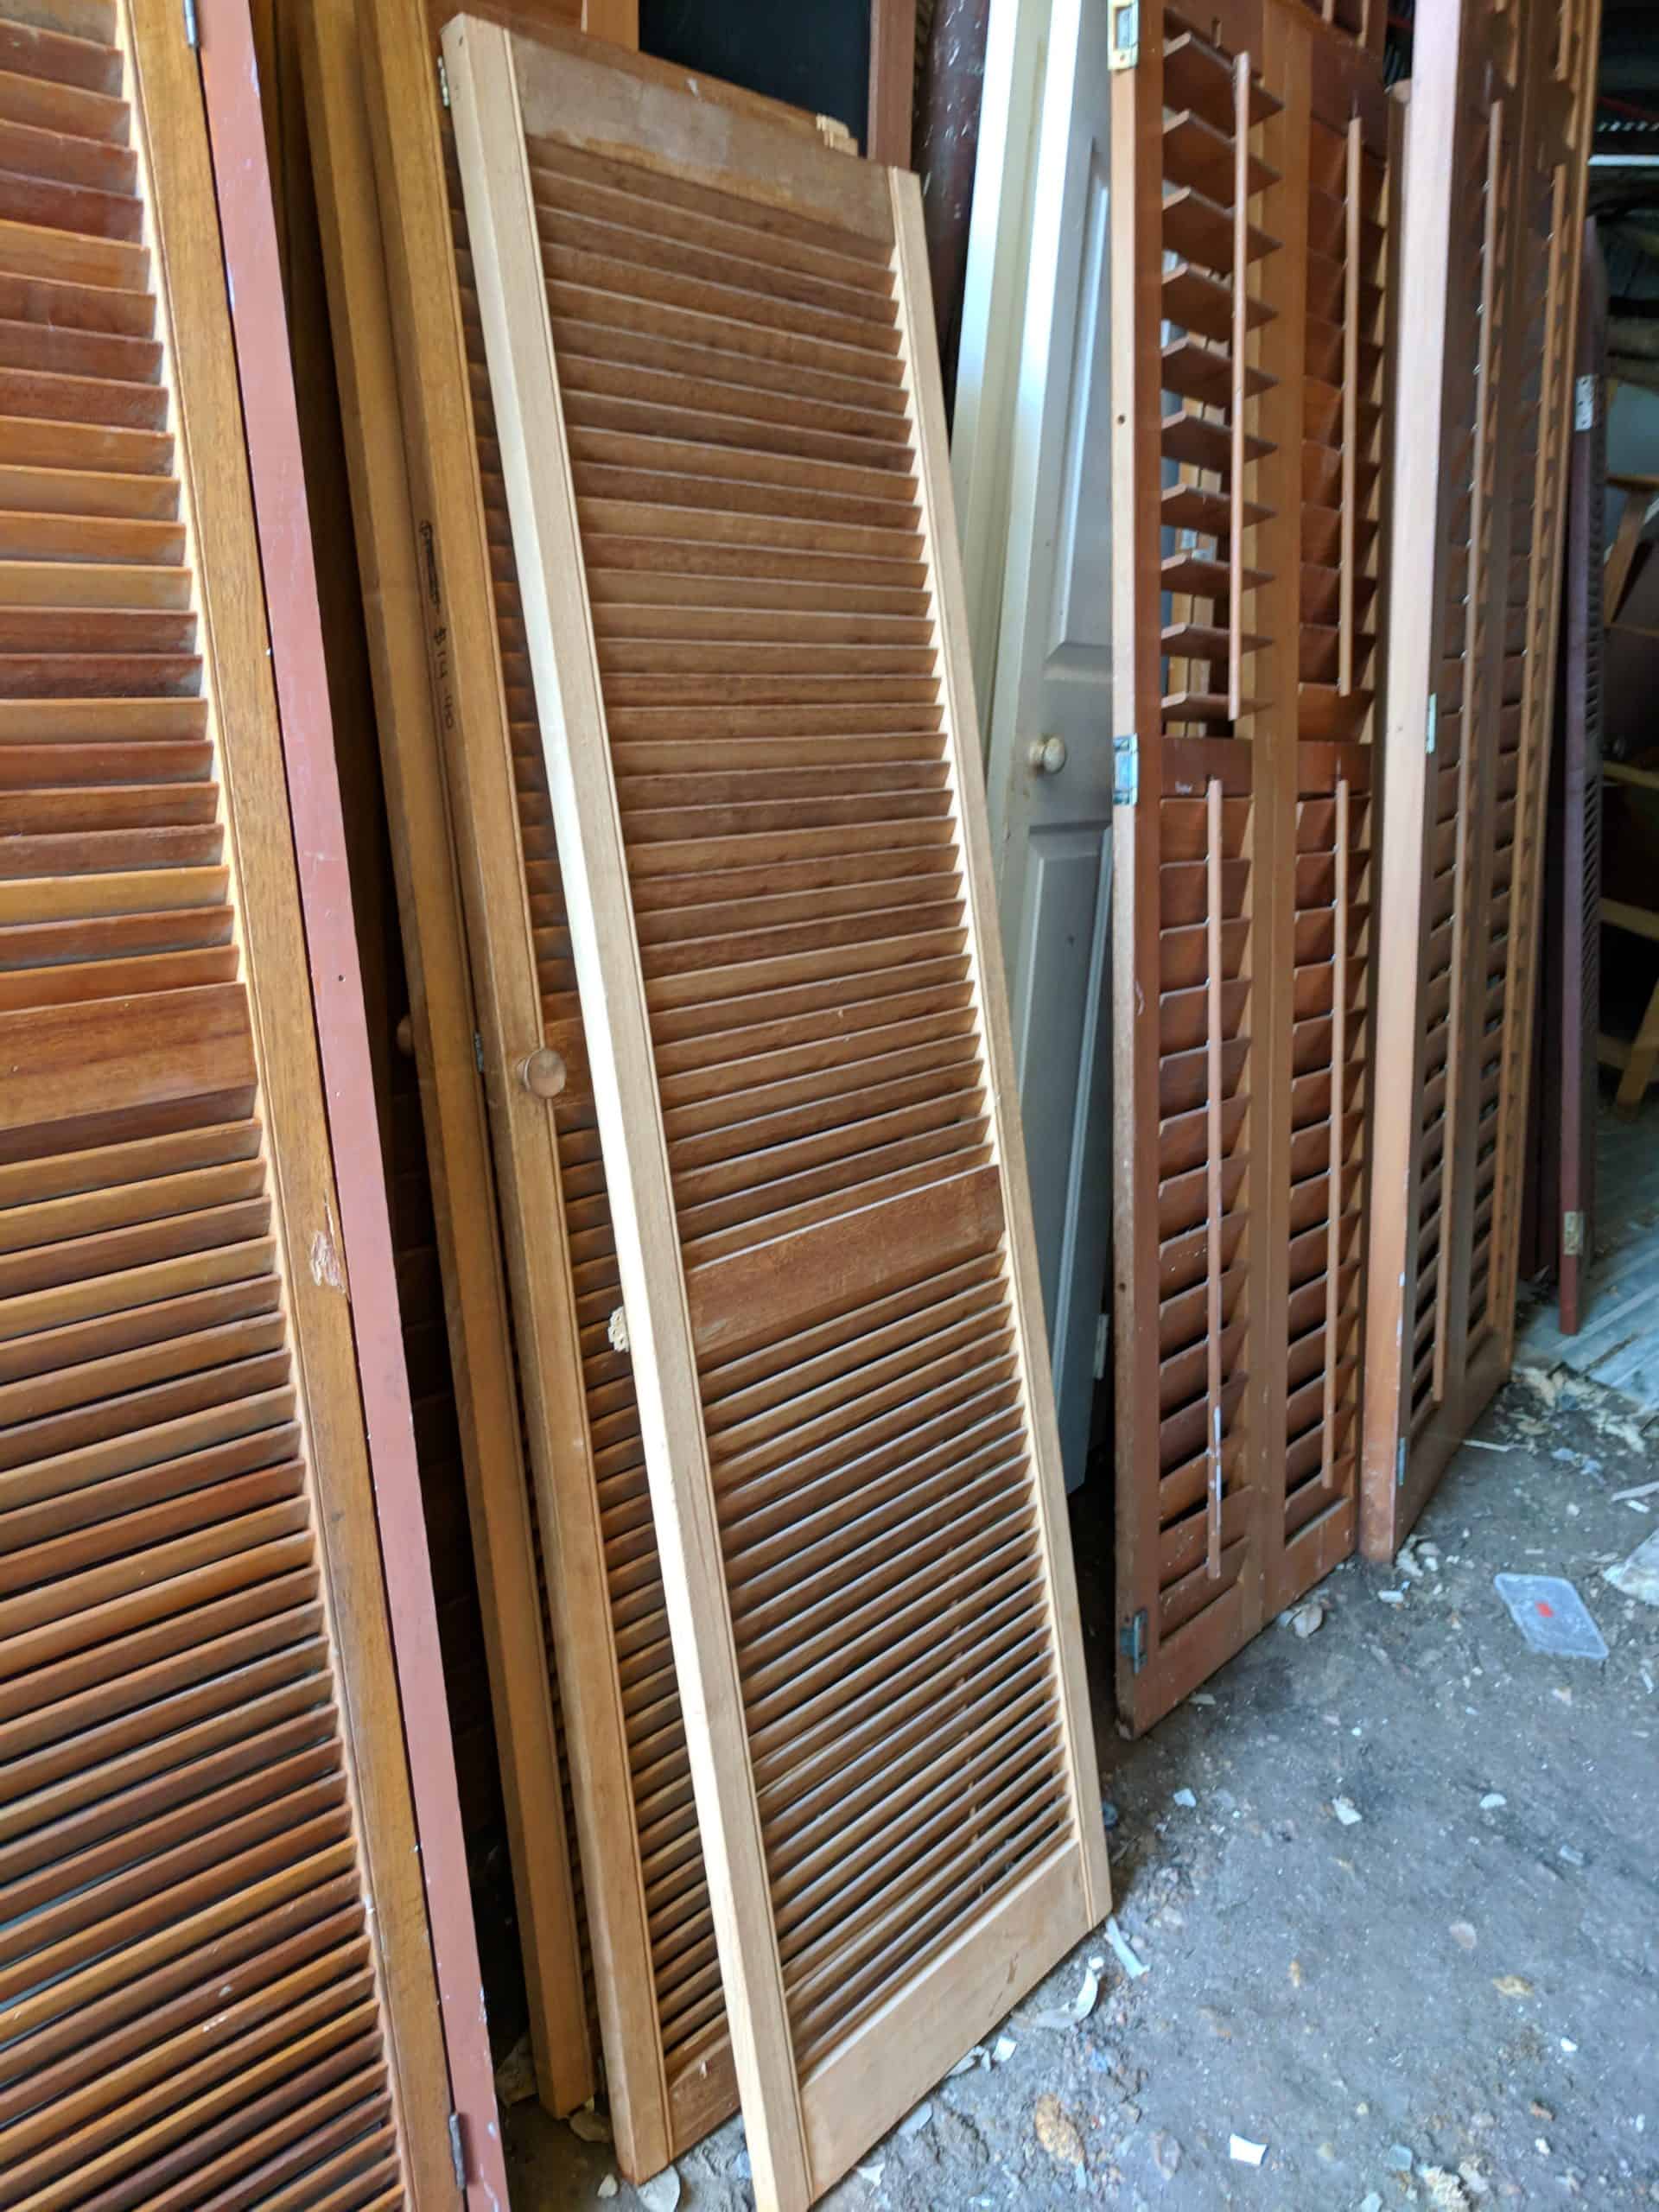 Brajkovich Salvage Yard Wooden Plantation Shutter and recycled materials